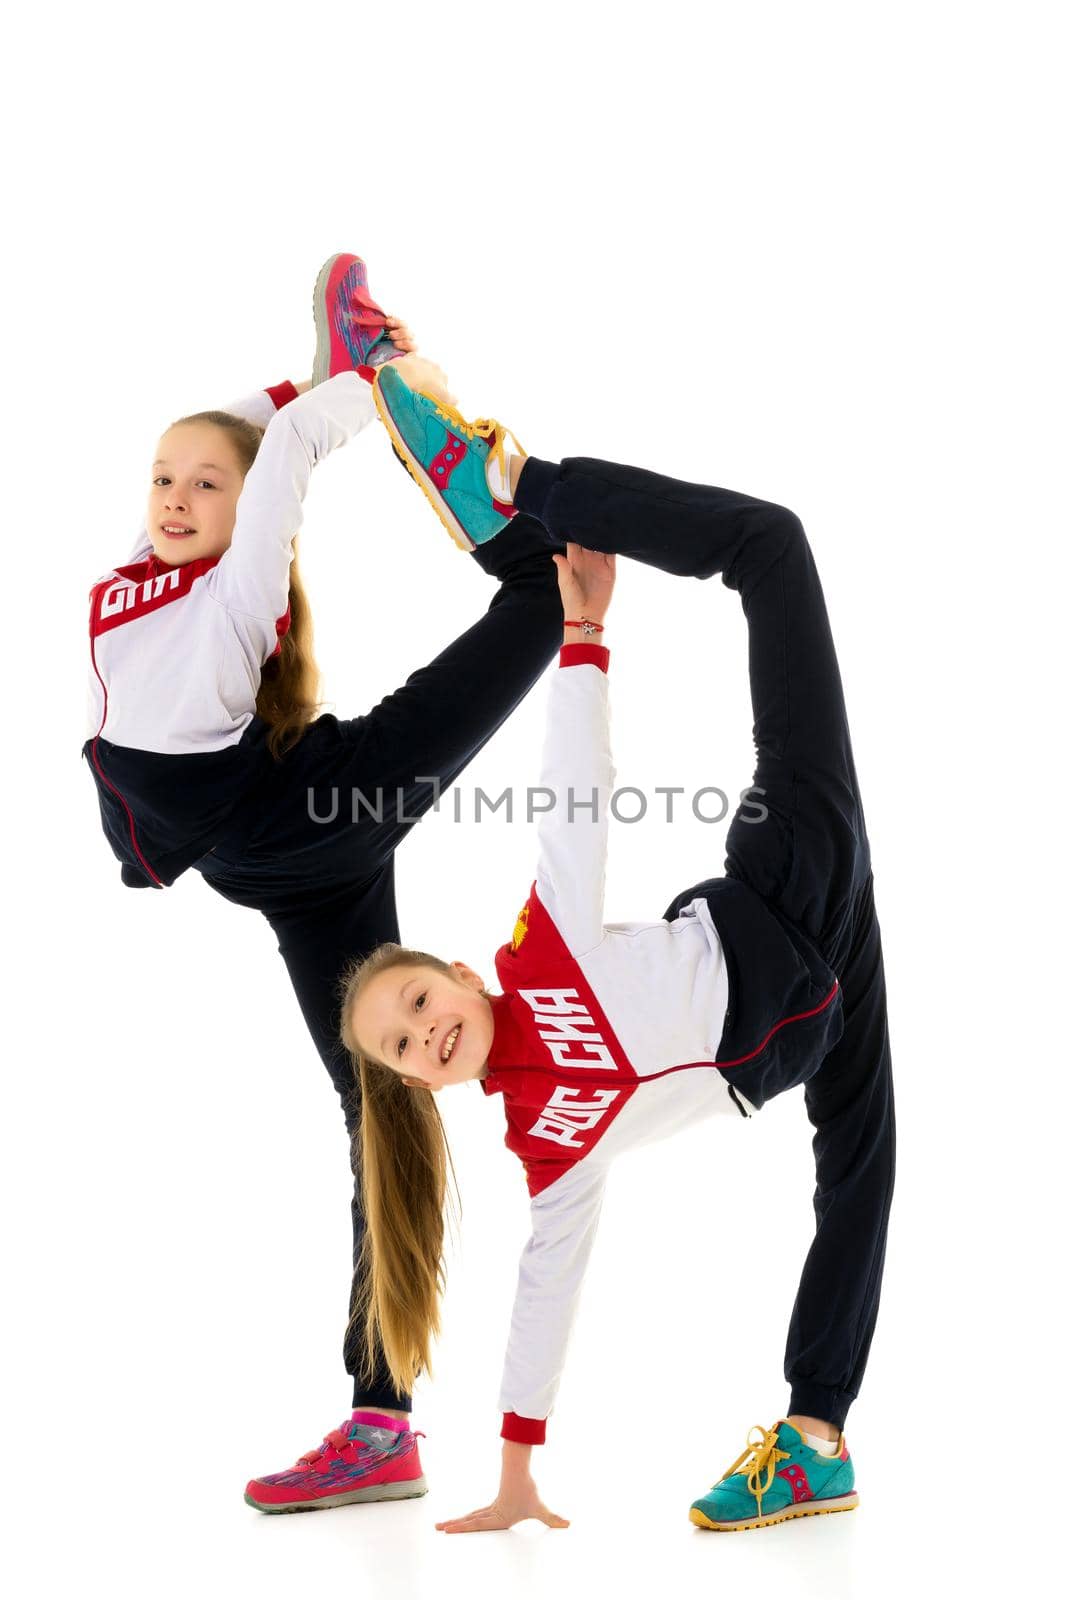 Girls gymnasts perform exercises. The concept of strength, health and sport. Isolated on white background.